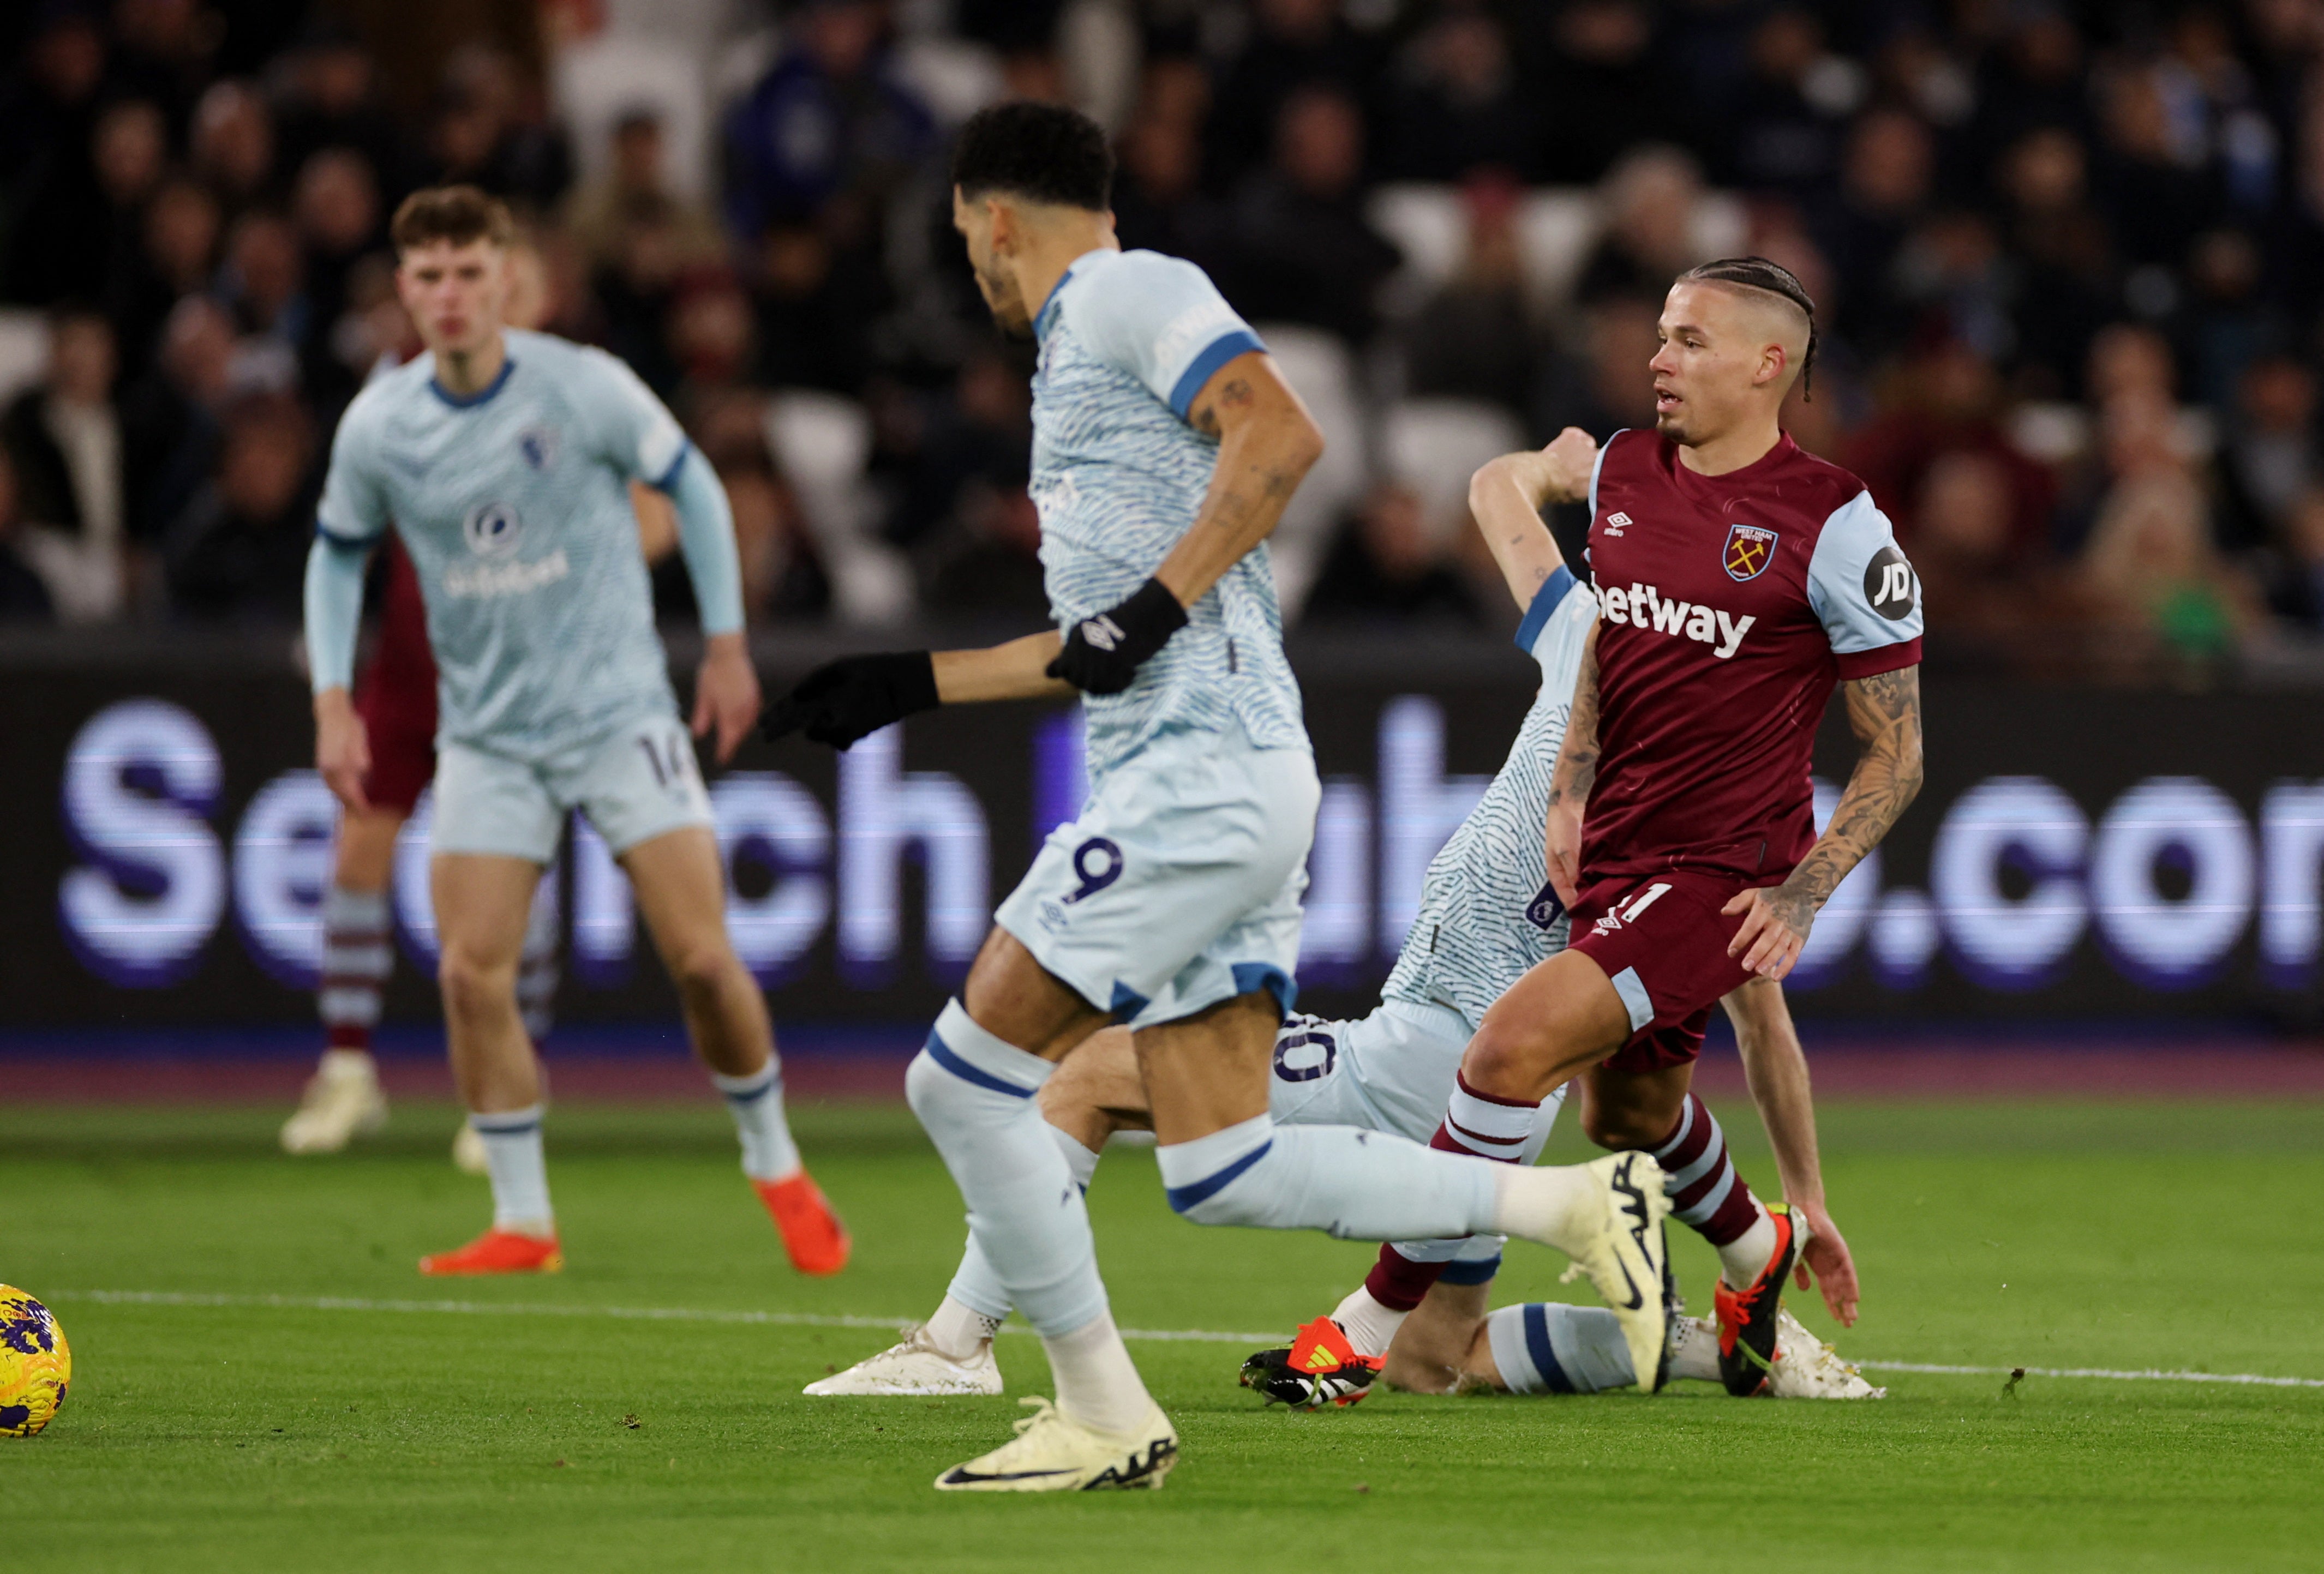 Kalvin Phillips makes debut howler to cost West Ham against Bournemouth | The Independent